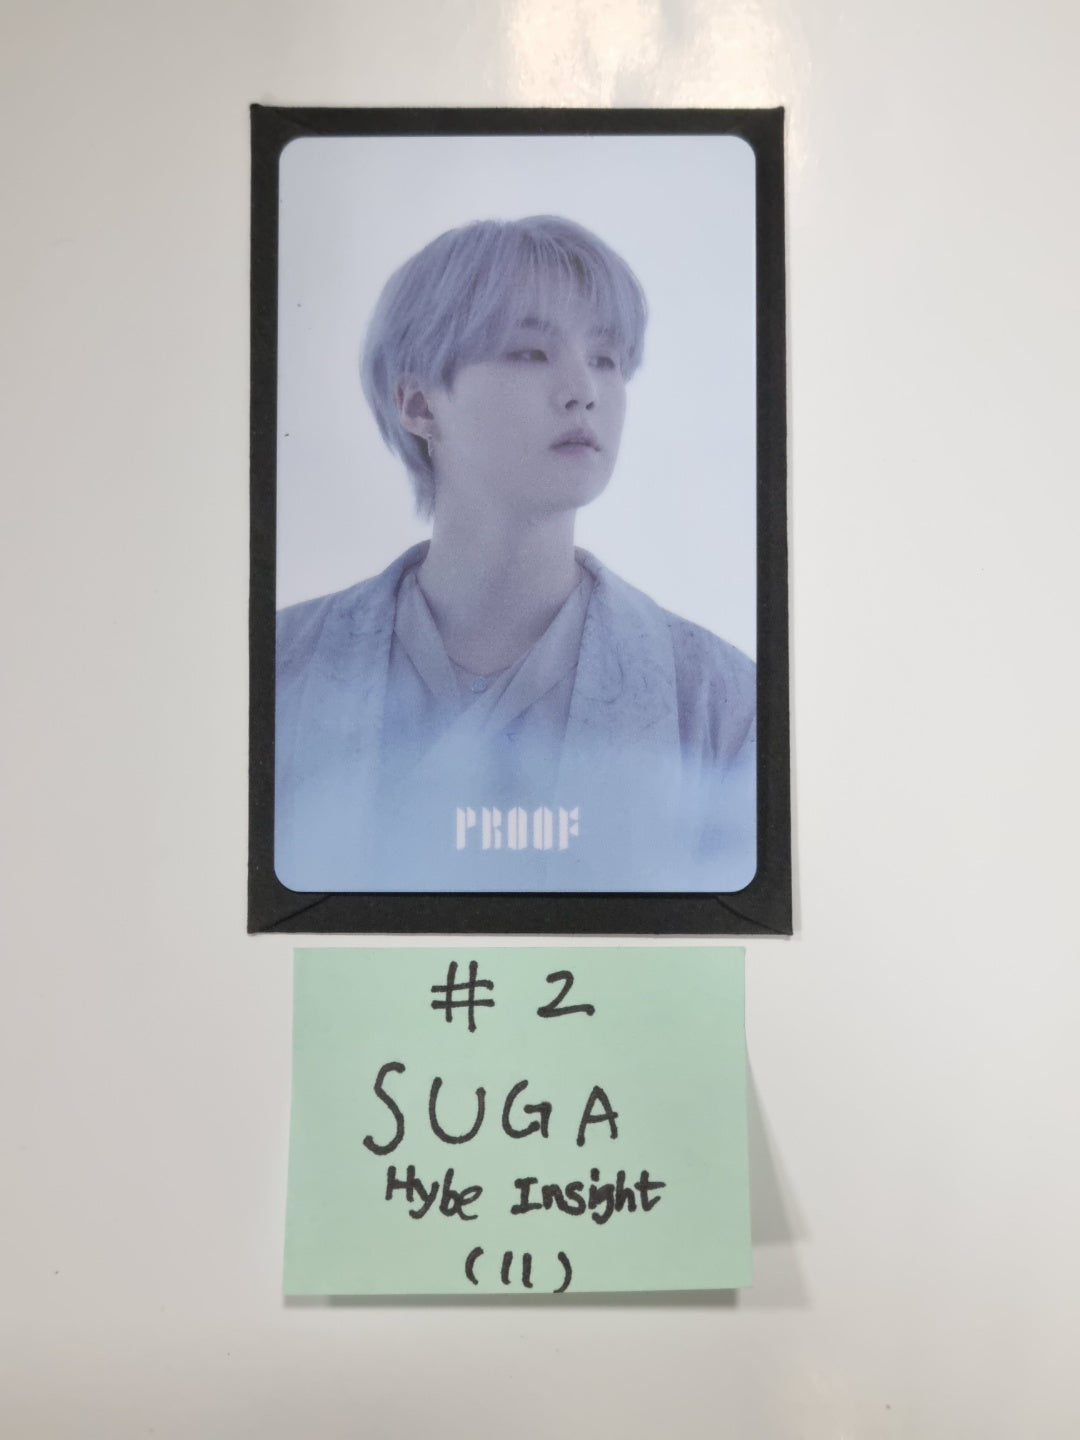 BTS "Proof" - Hybe Insight Event PVC Photocard